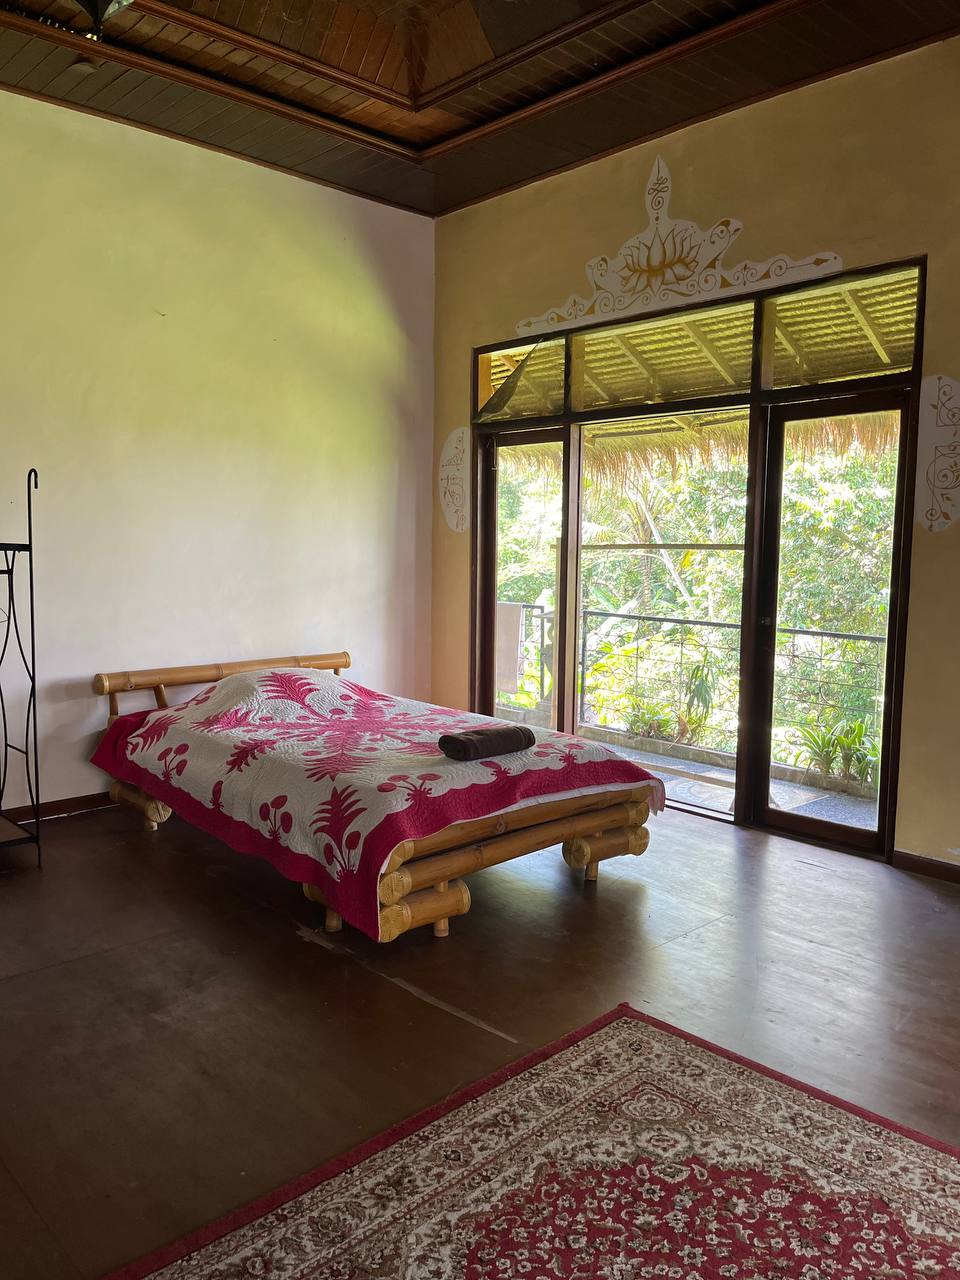 Single bed in Large shared 3 bed room - 1 Person - 1 month - Bali Flow Temple - Living Room with Daily Classes